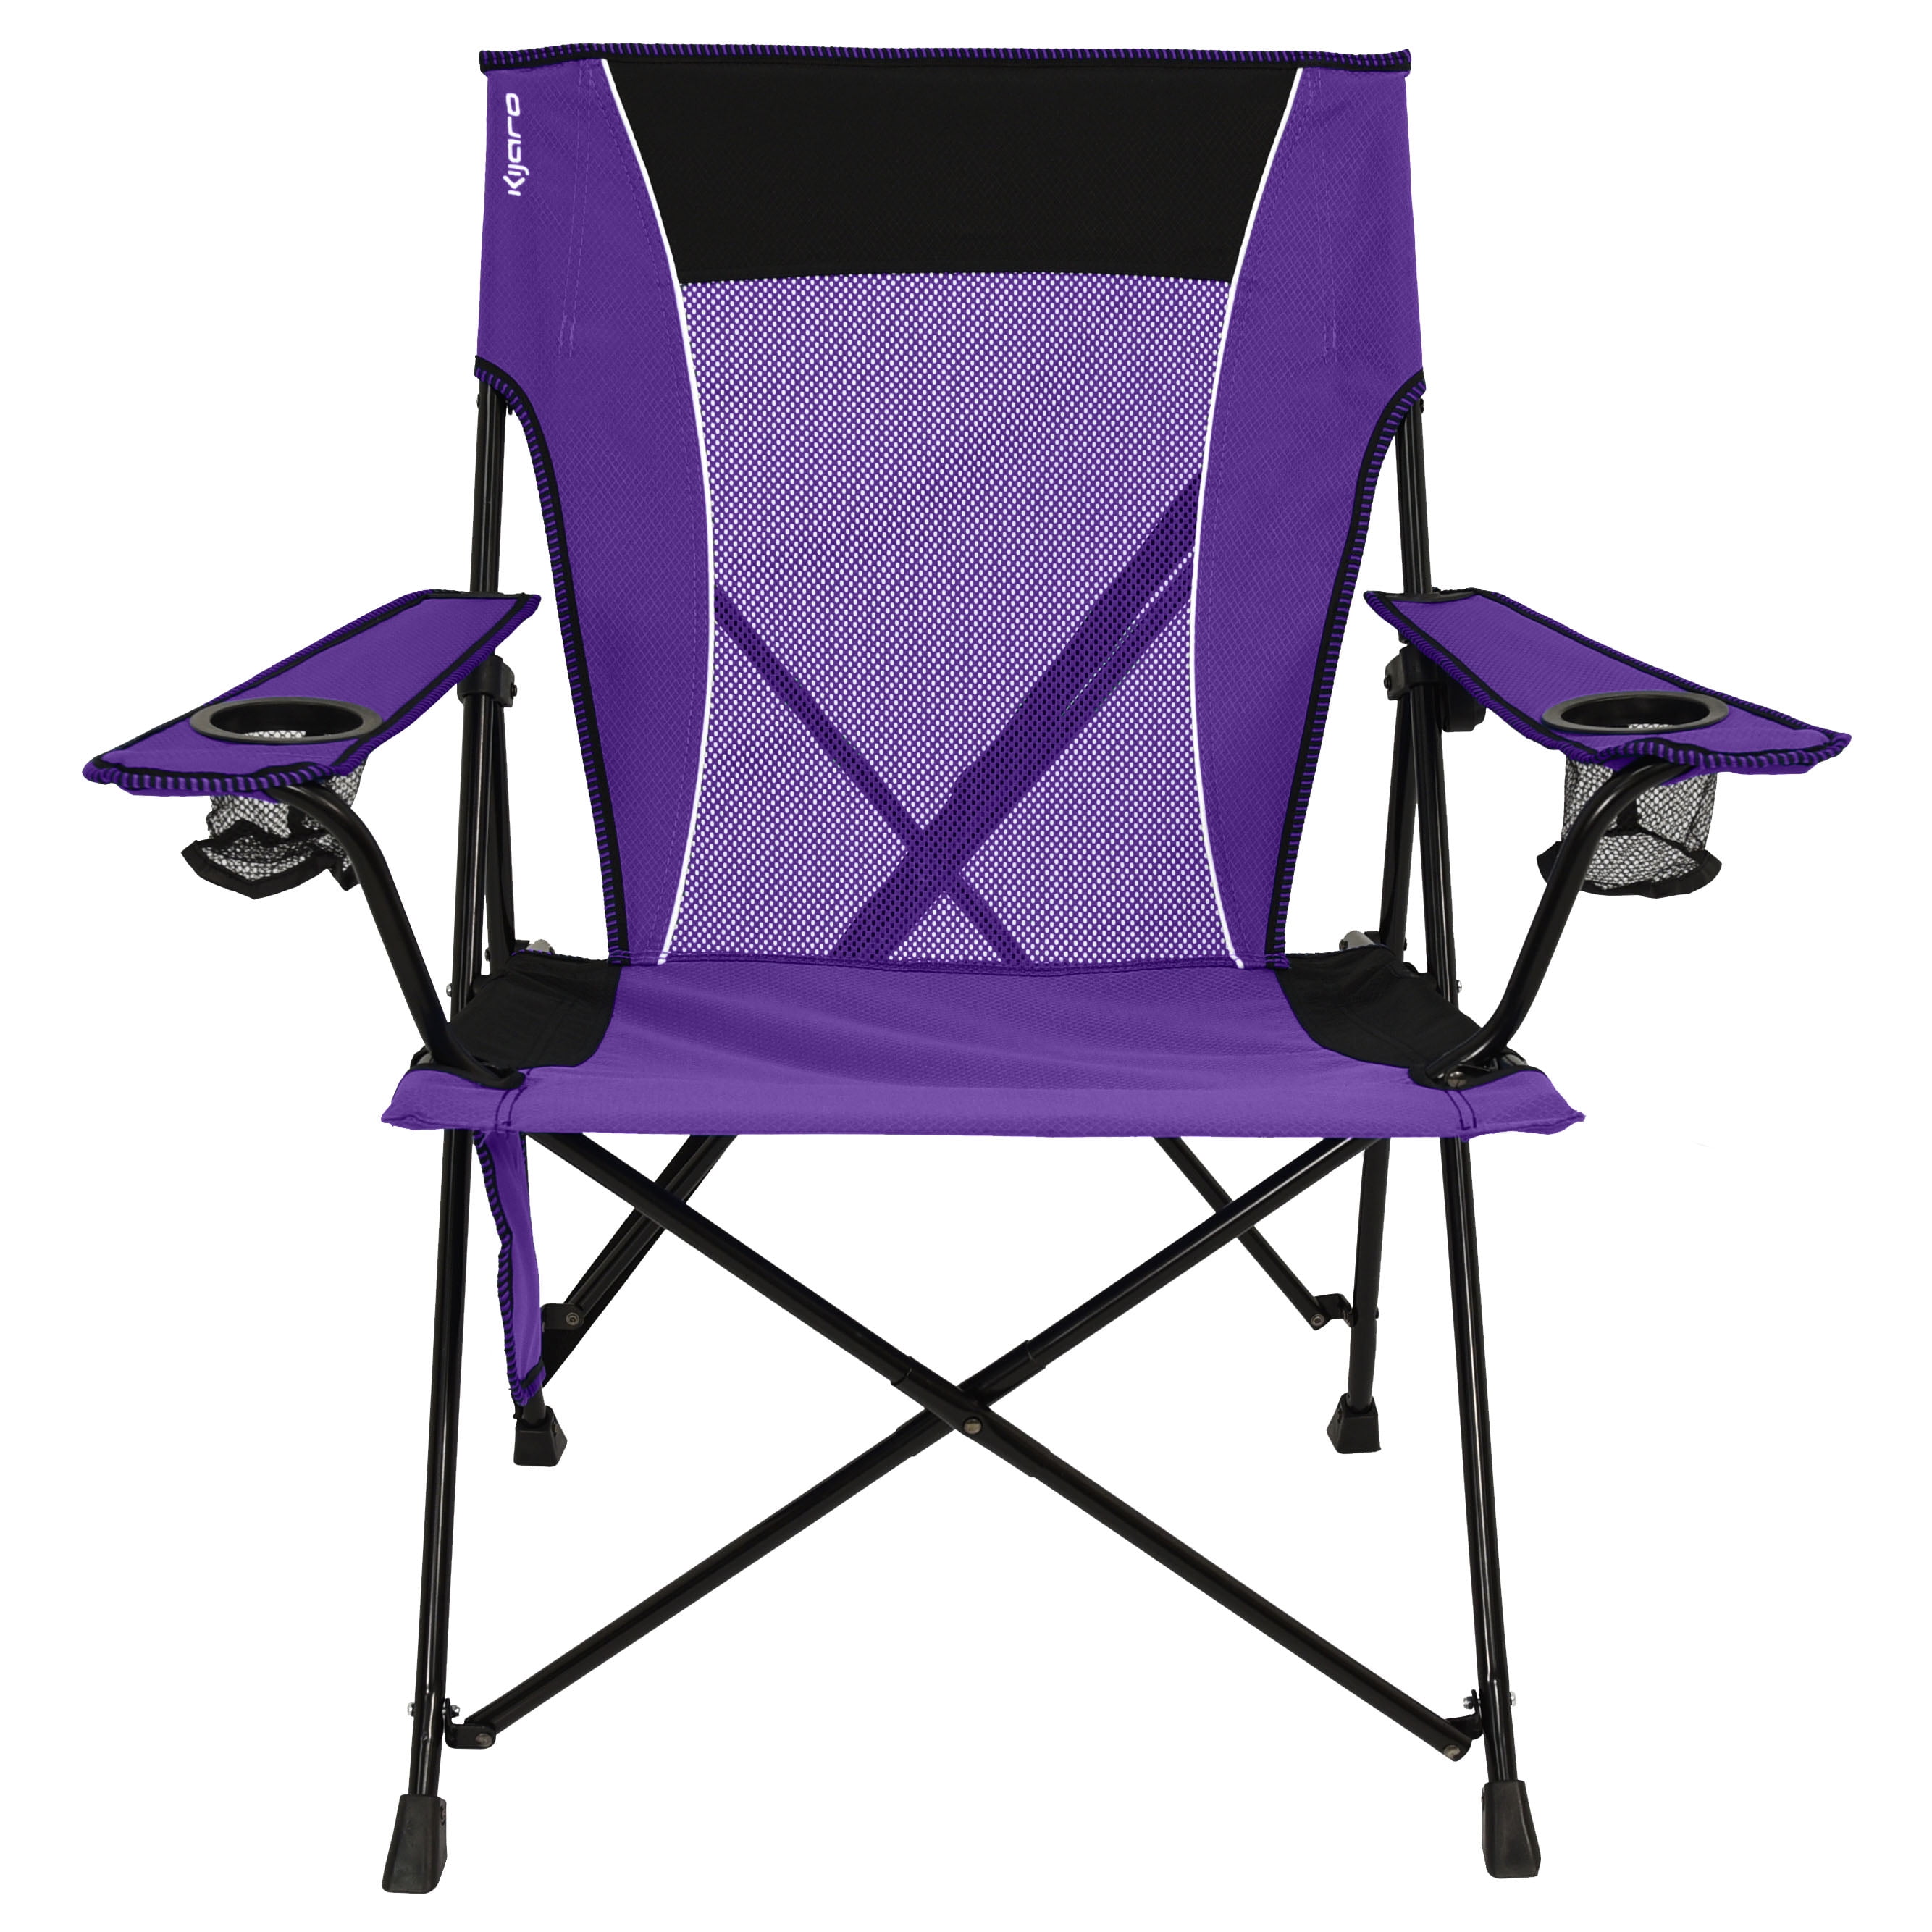 Details about   Kijaro XXL Dual Lock Portable Camping and Sports Chair 